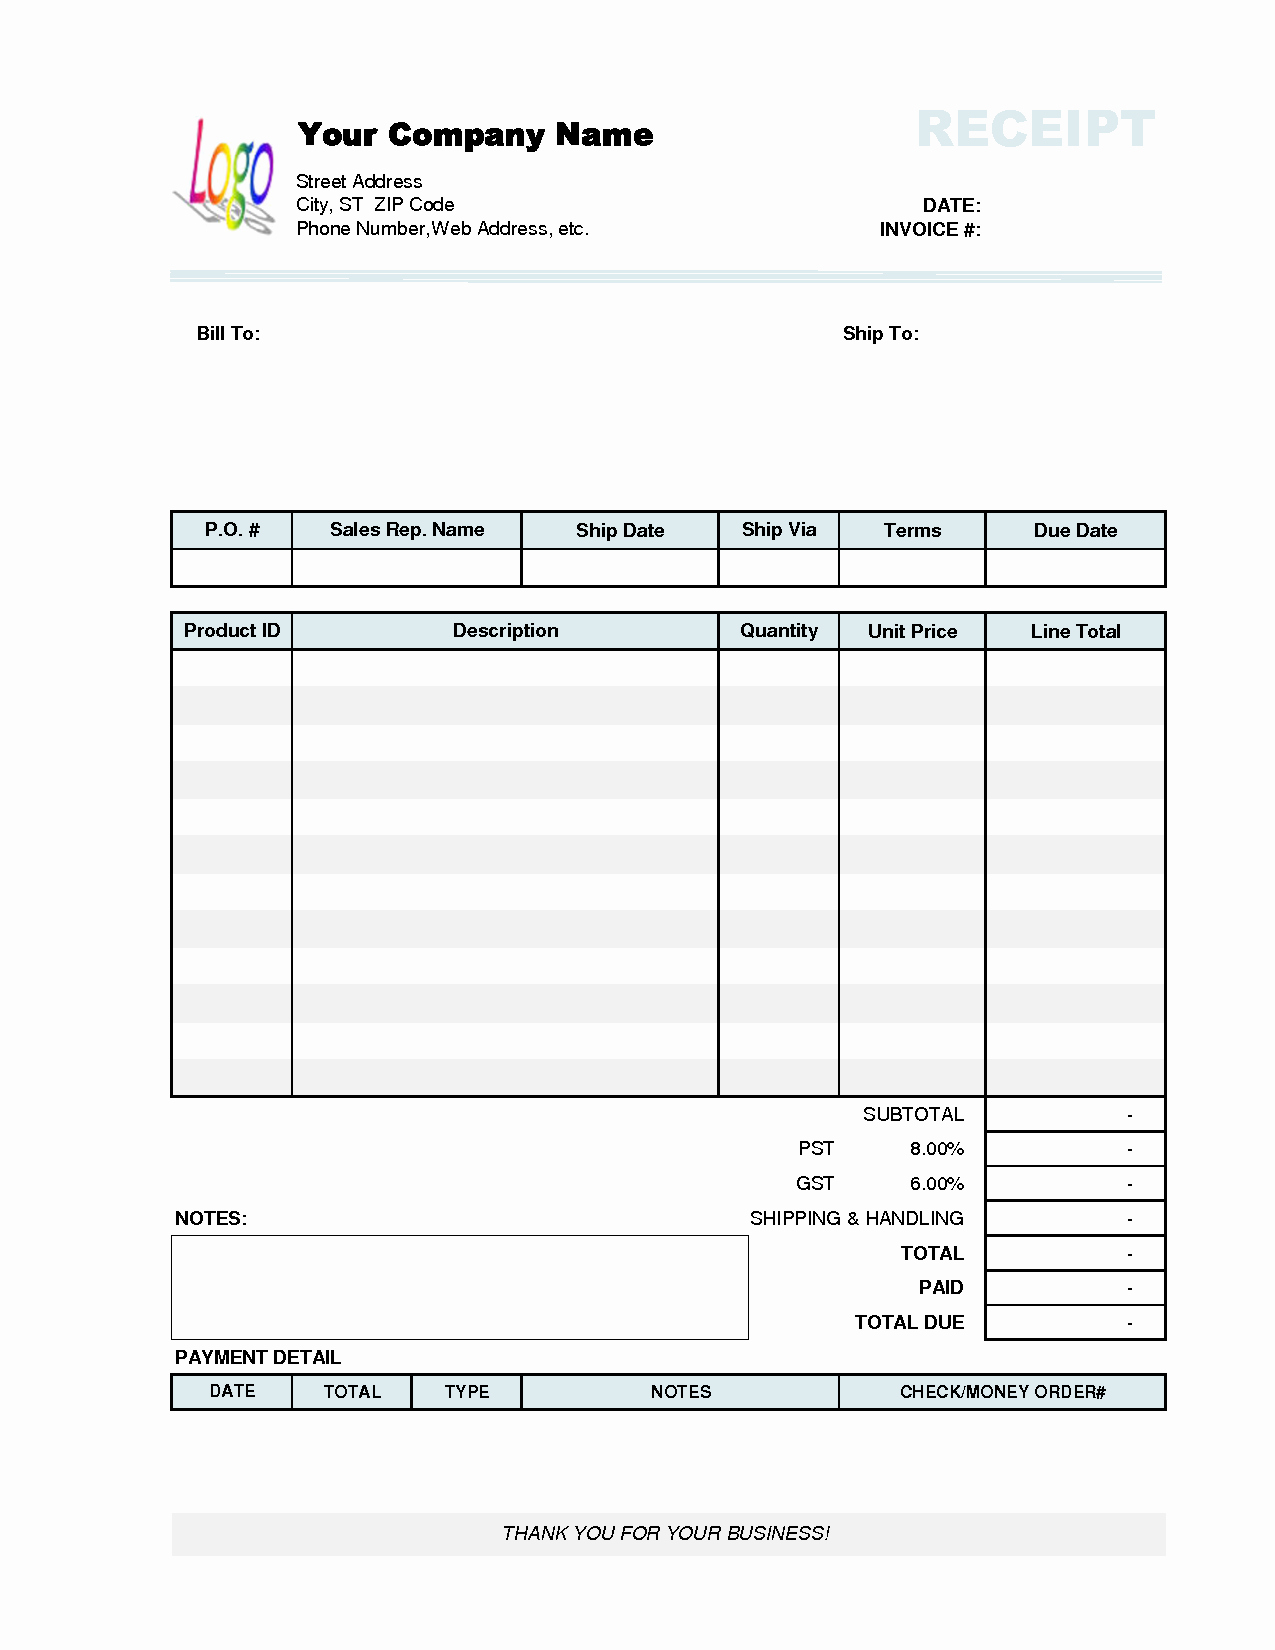 Sample Invoice Template Excel Inspirational Receipt Invoice Template